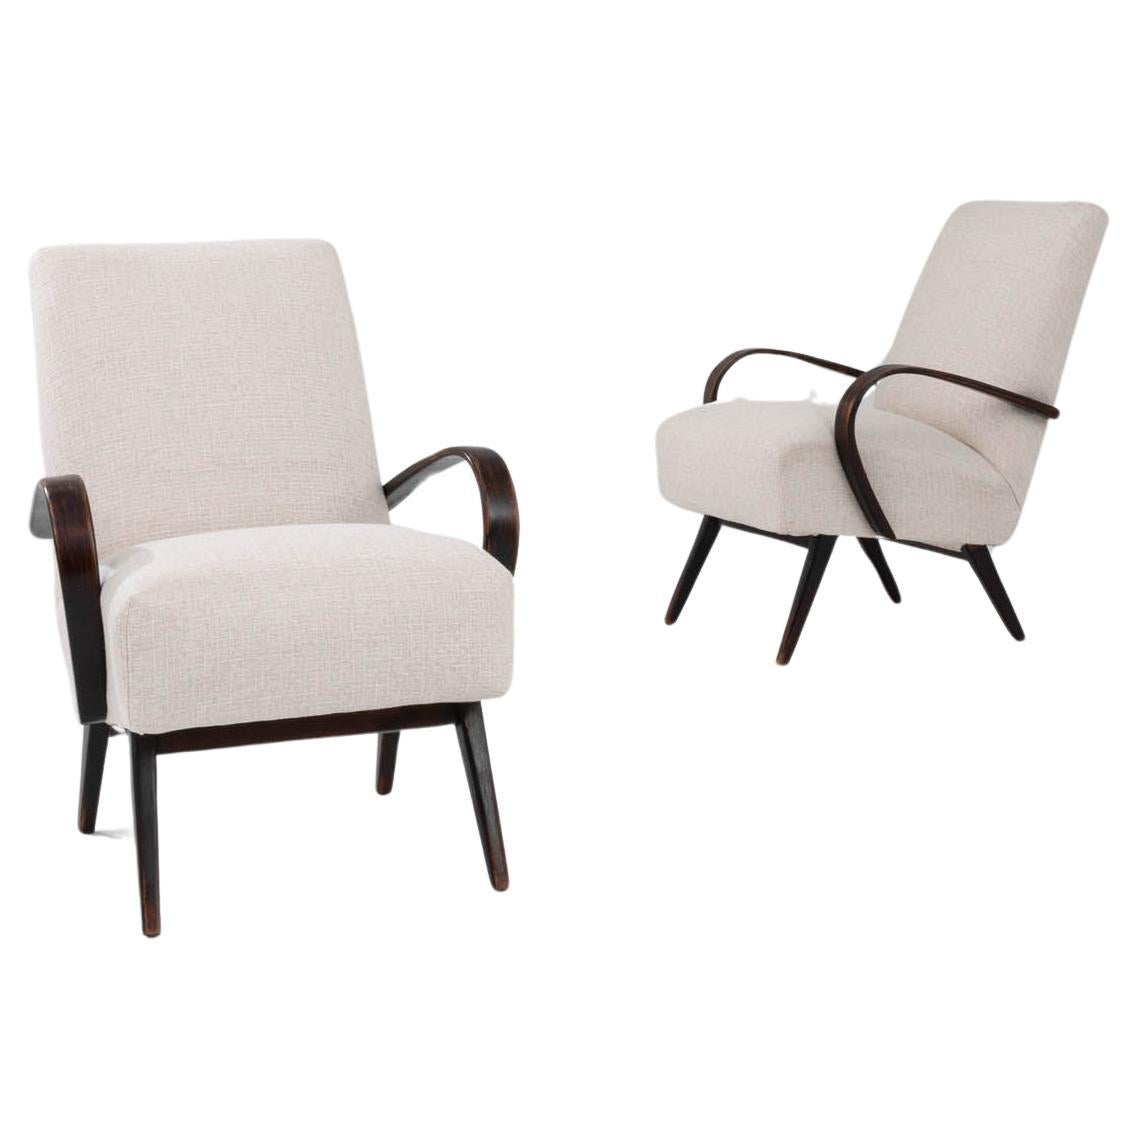 1960s Czech Upholstered Armchairs By J. Halabala, a Pair